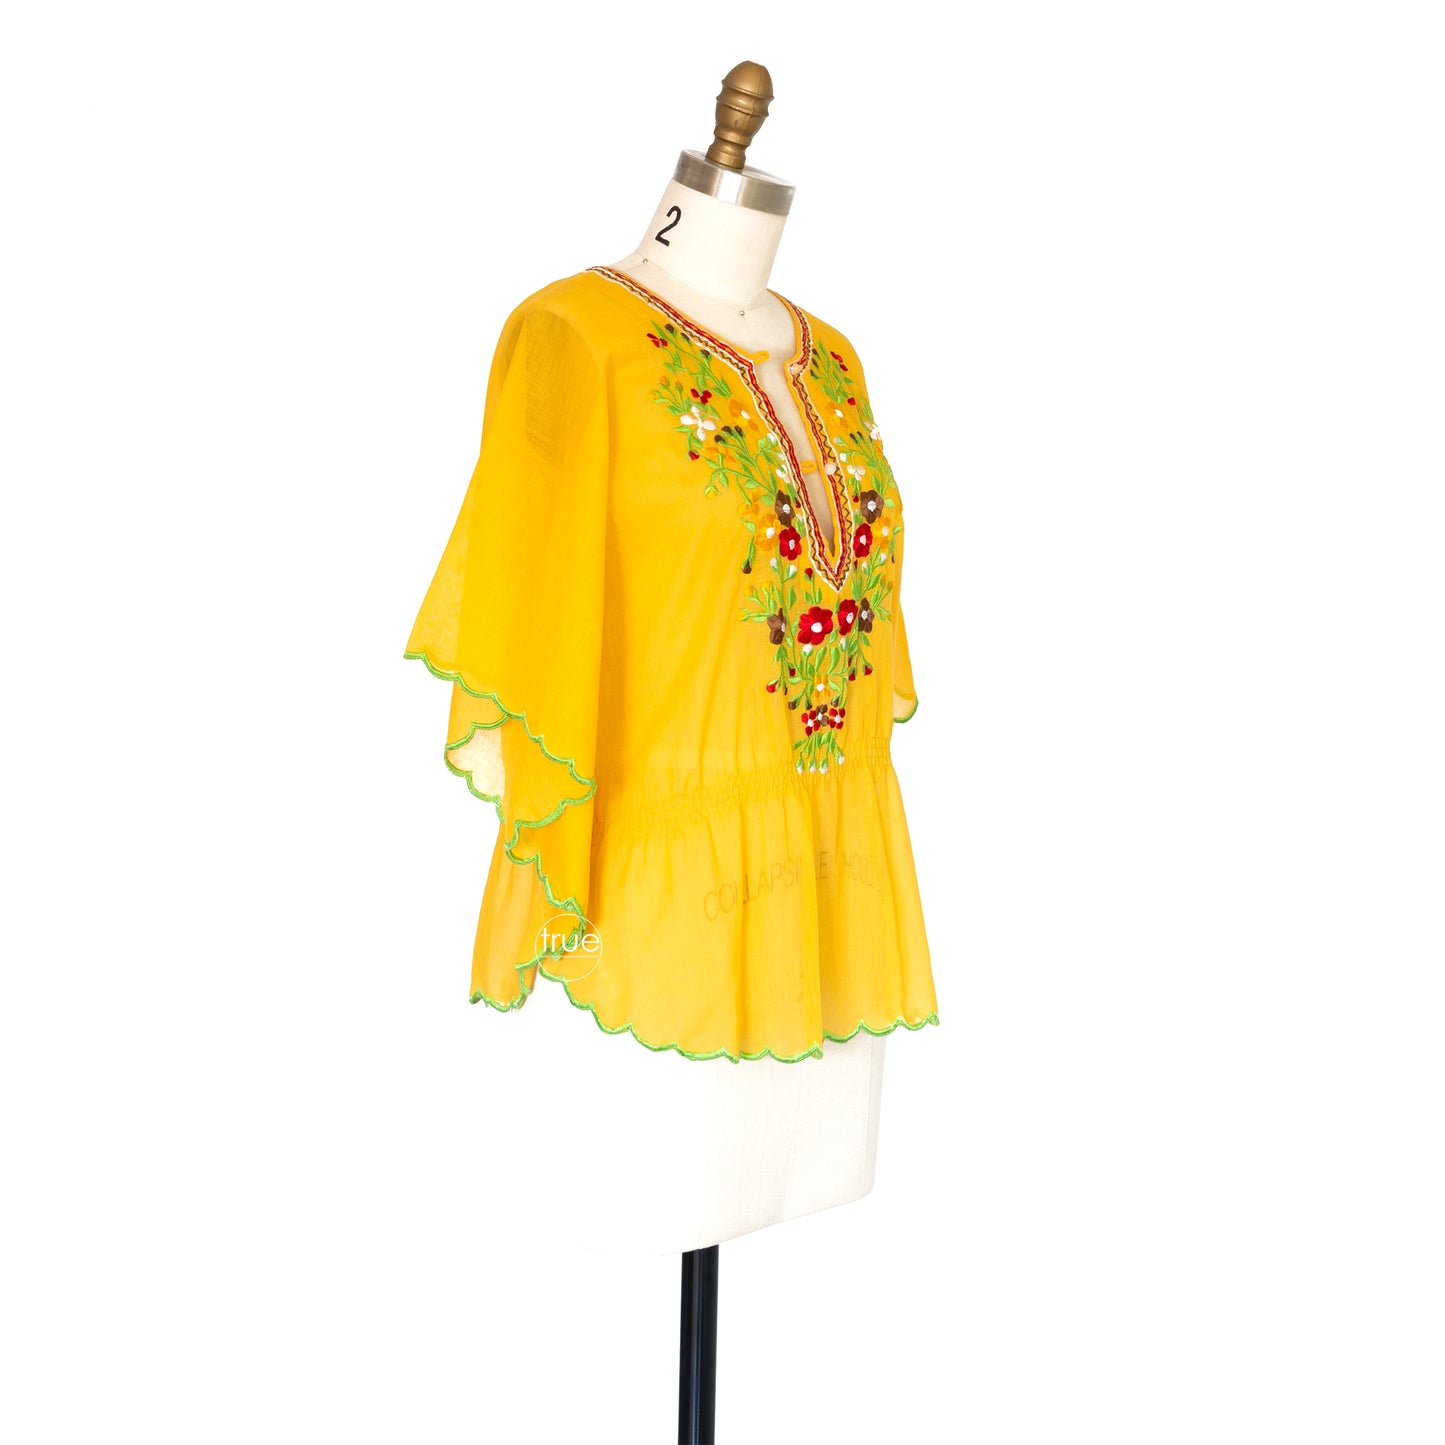 vintage 1970's top ...gorgeous golden yellow embroidered gauzy poncho top